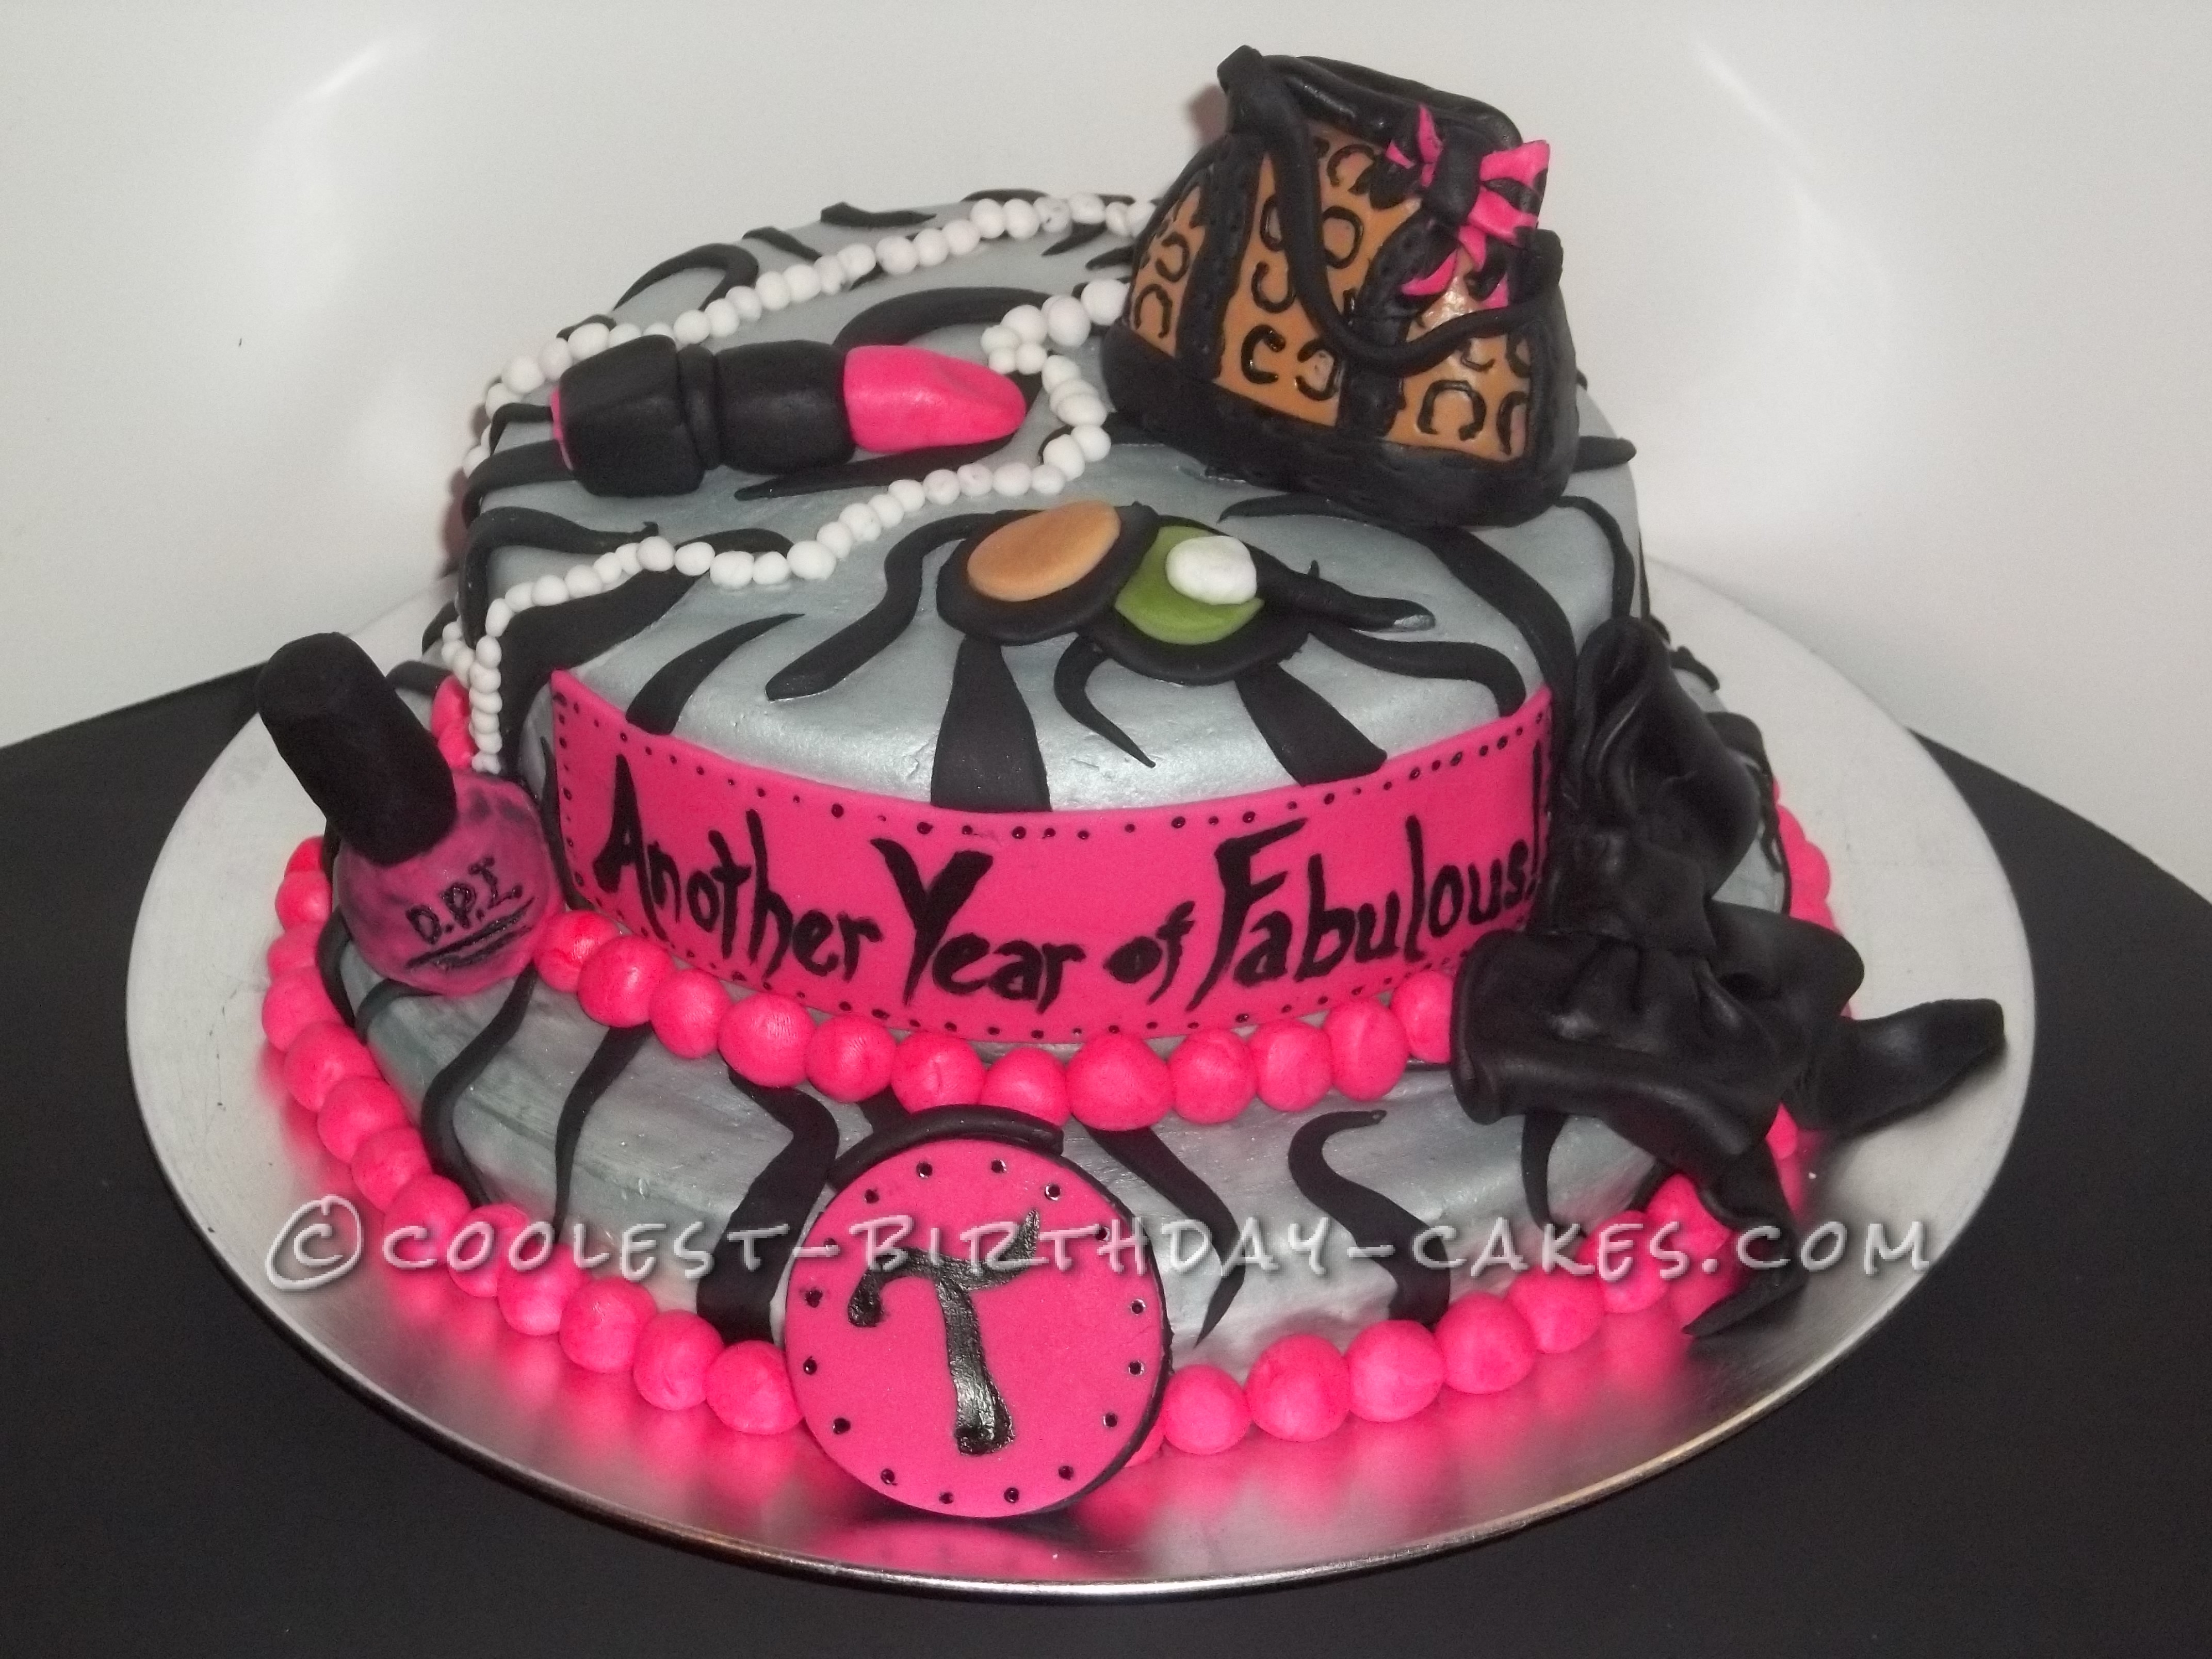 Coolest Glamour Birthday Cake for a Fabulous Friend